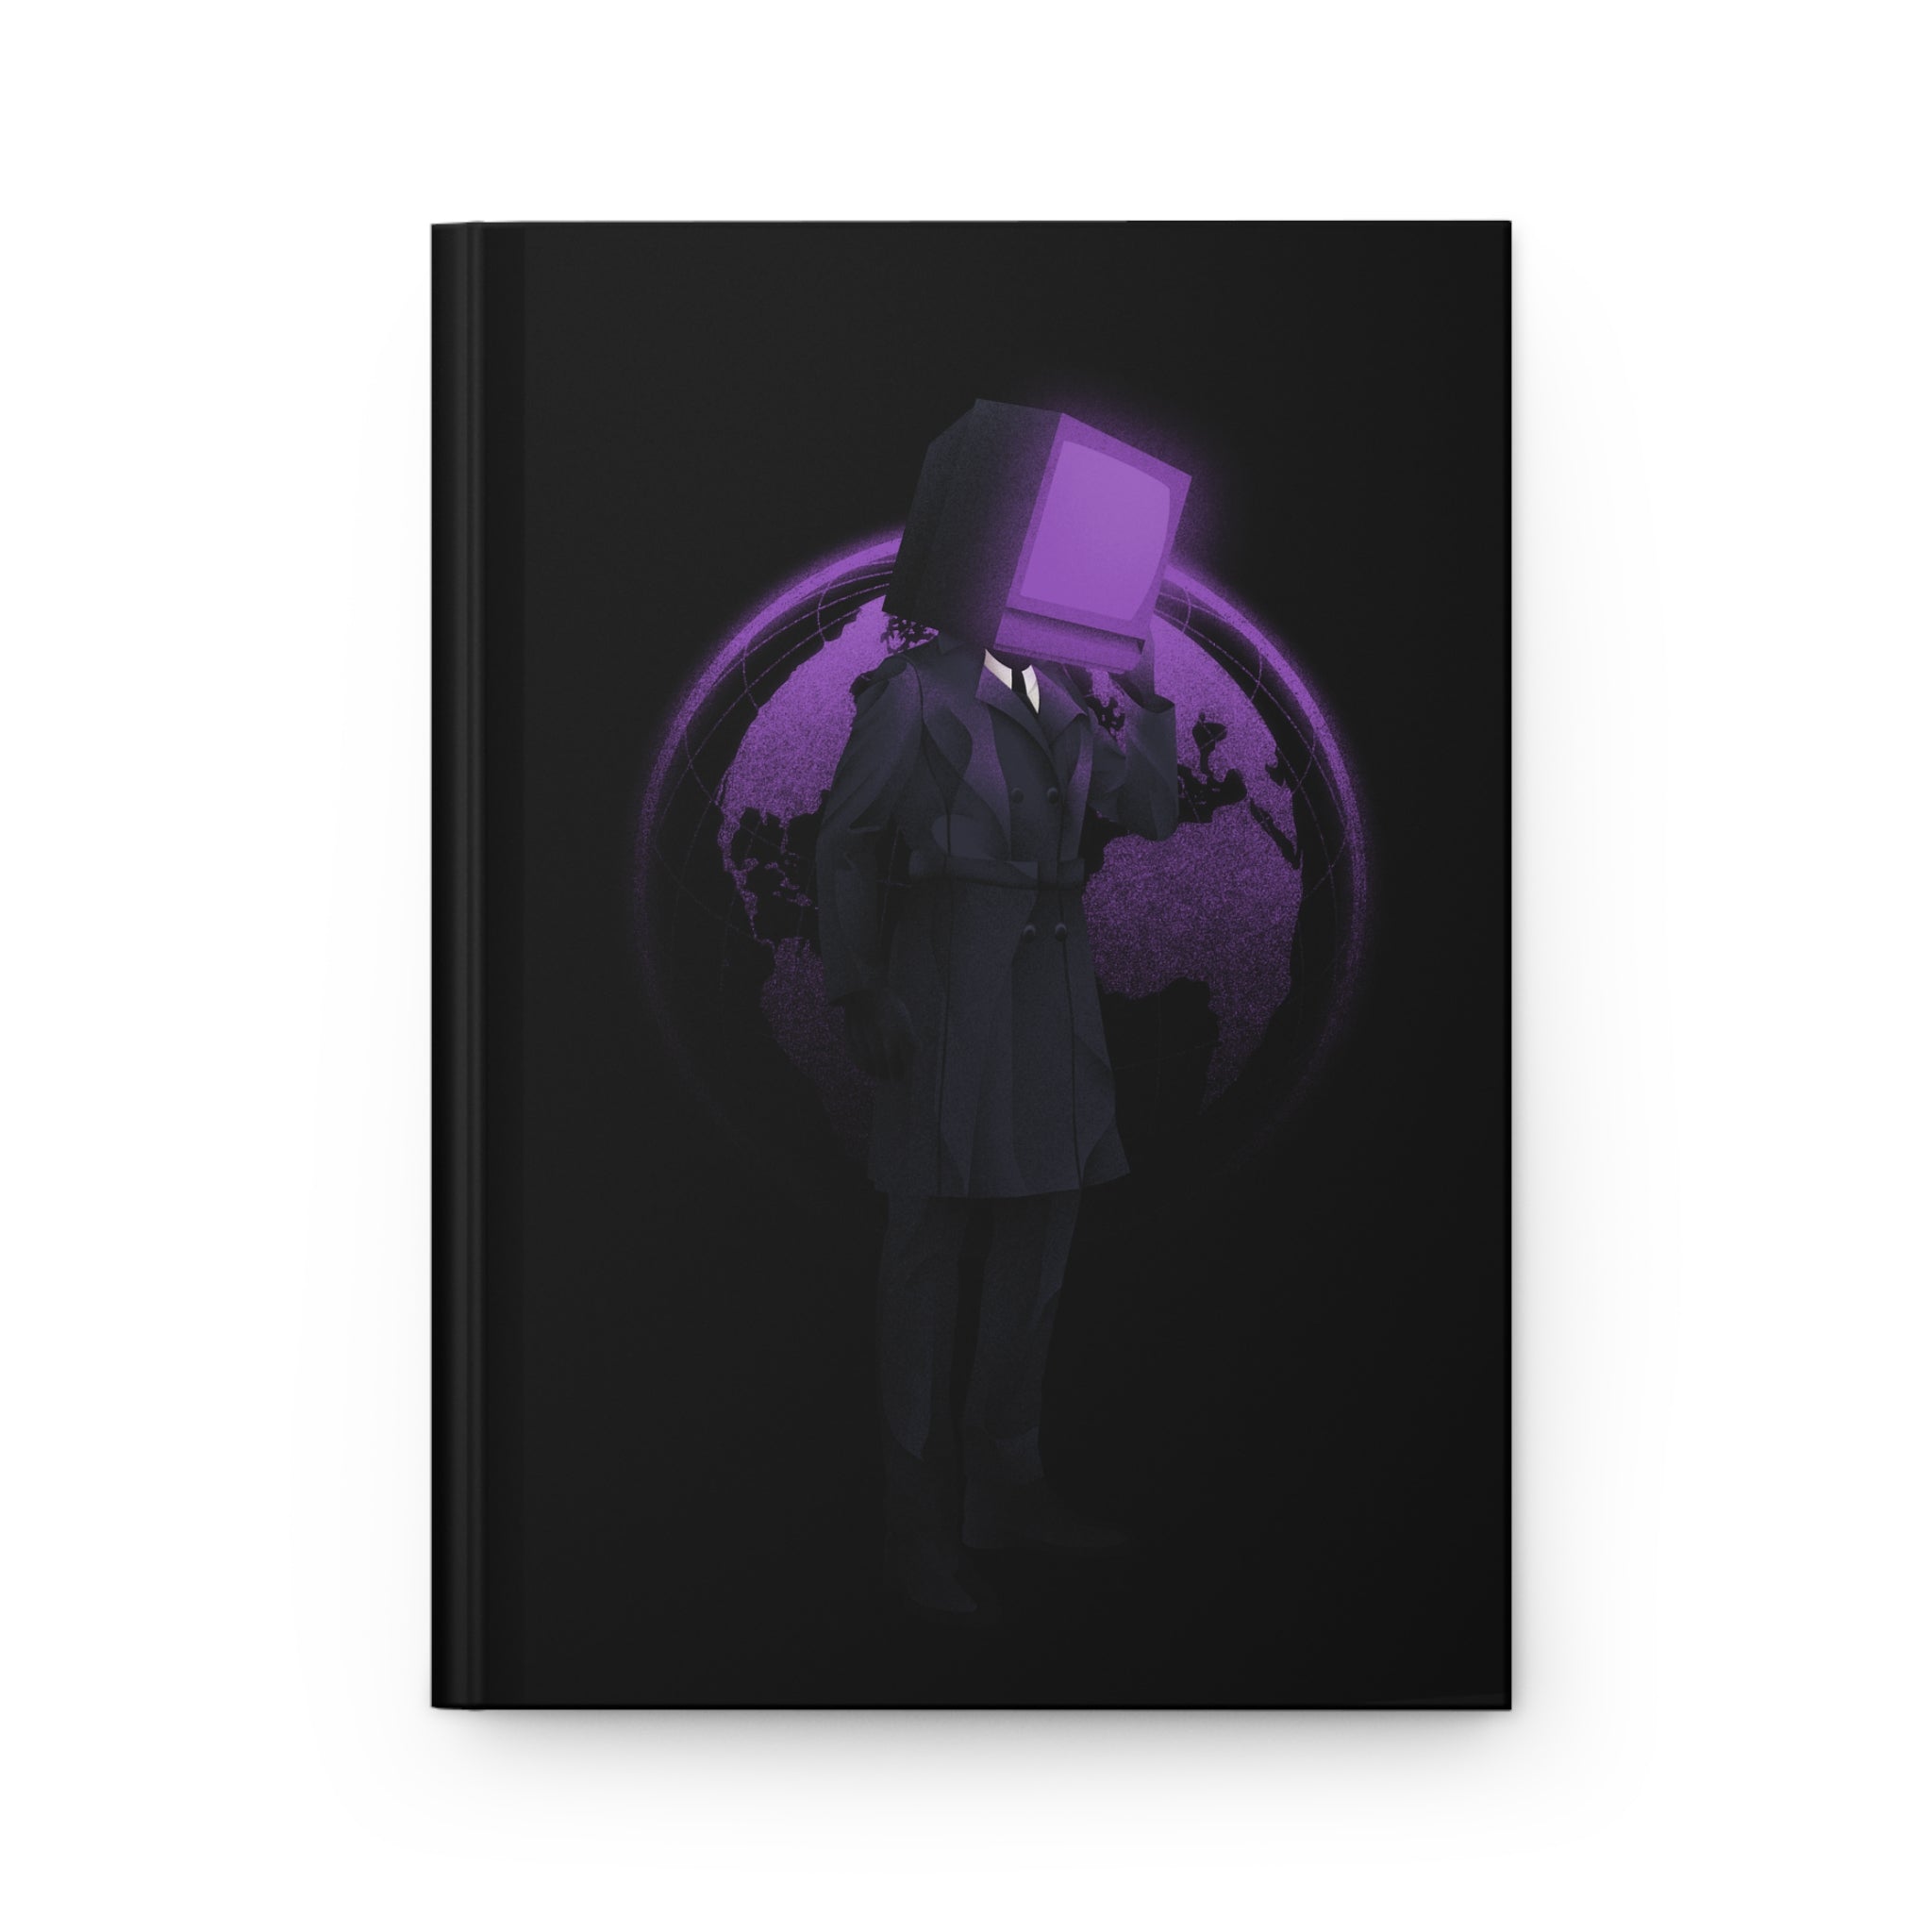 Black journal with TV Man looking over a purple world